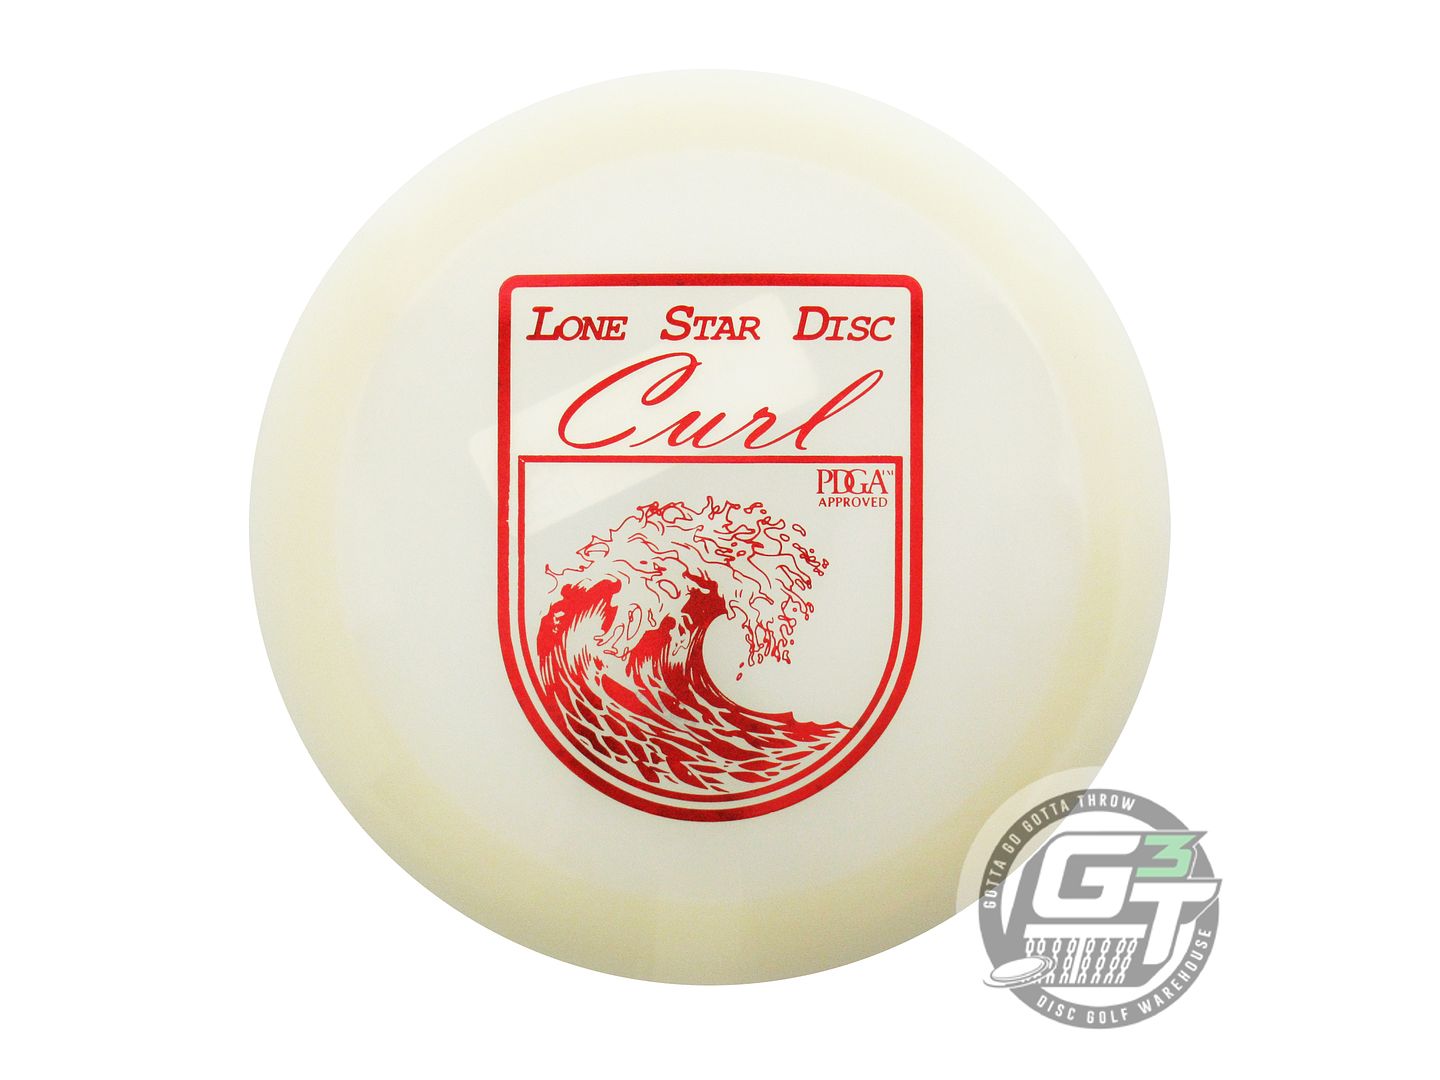 Lone Star Artist Series Glow Curl Distance Driver Golf Disc (Individually Listed)